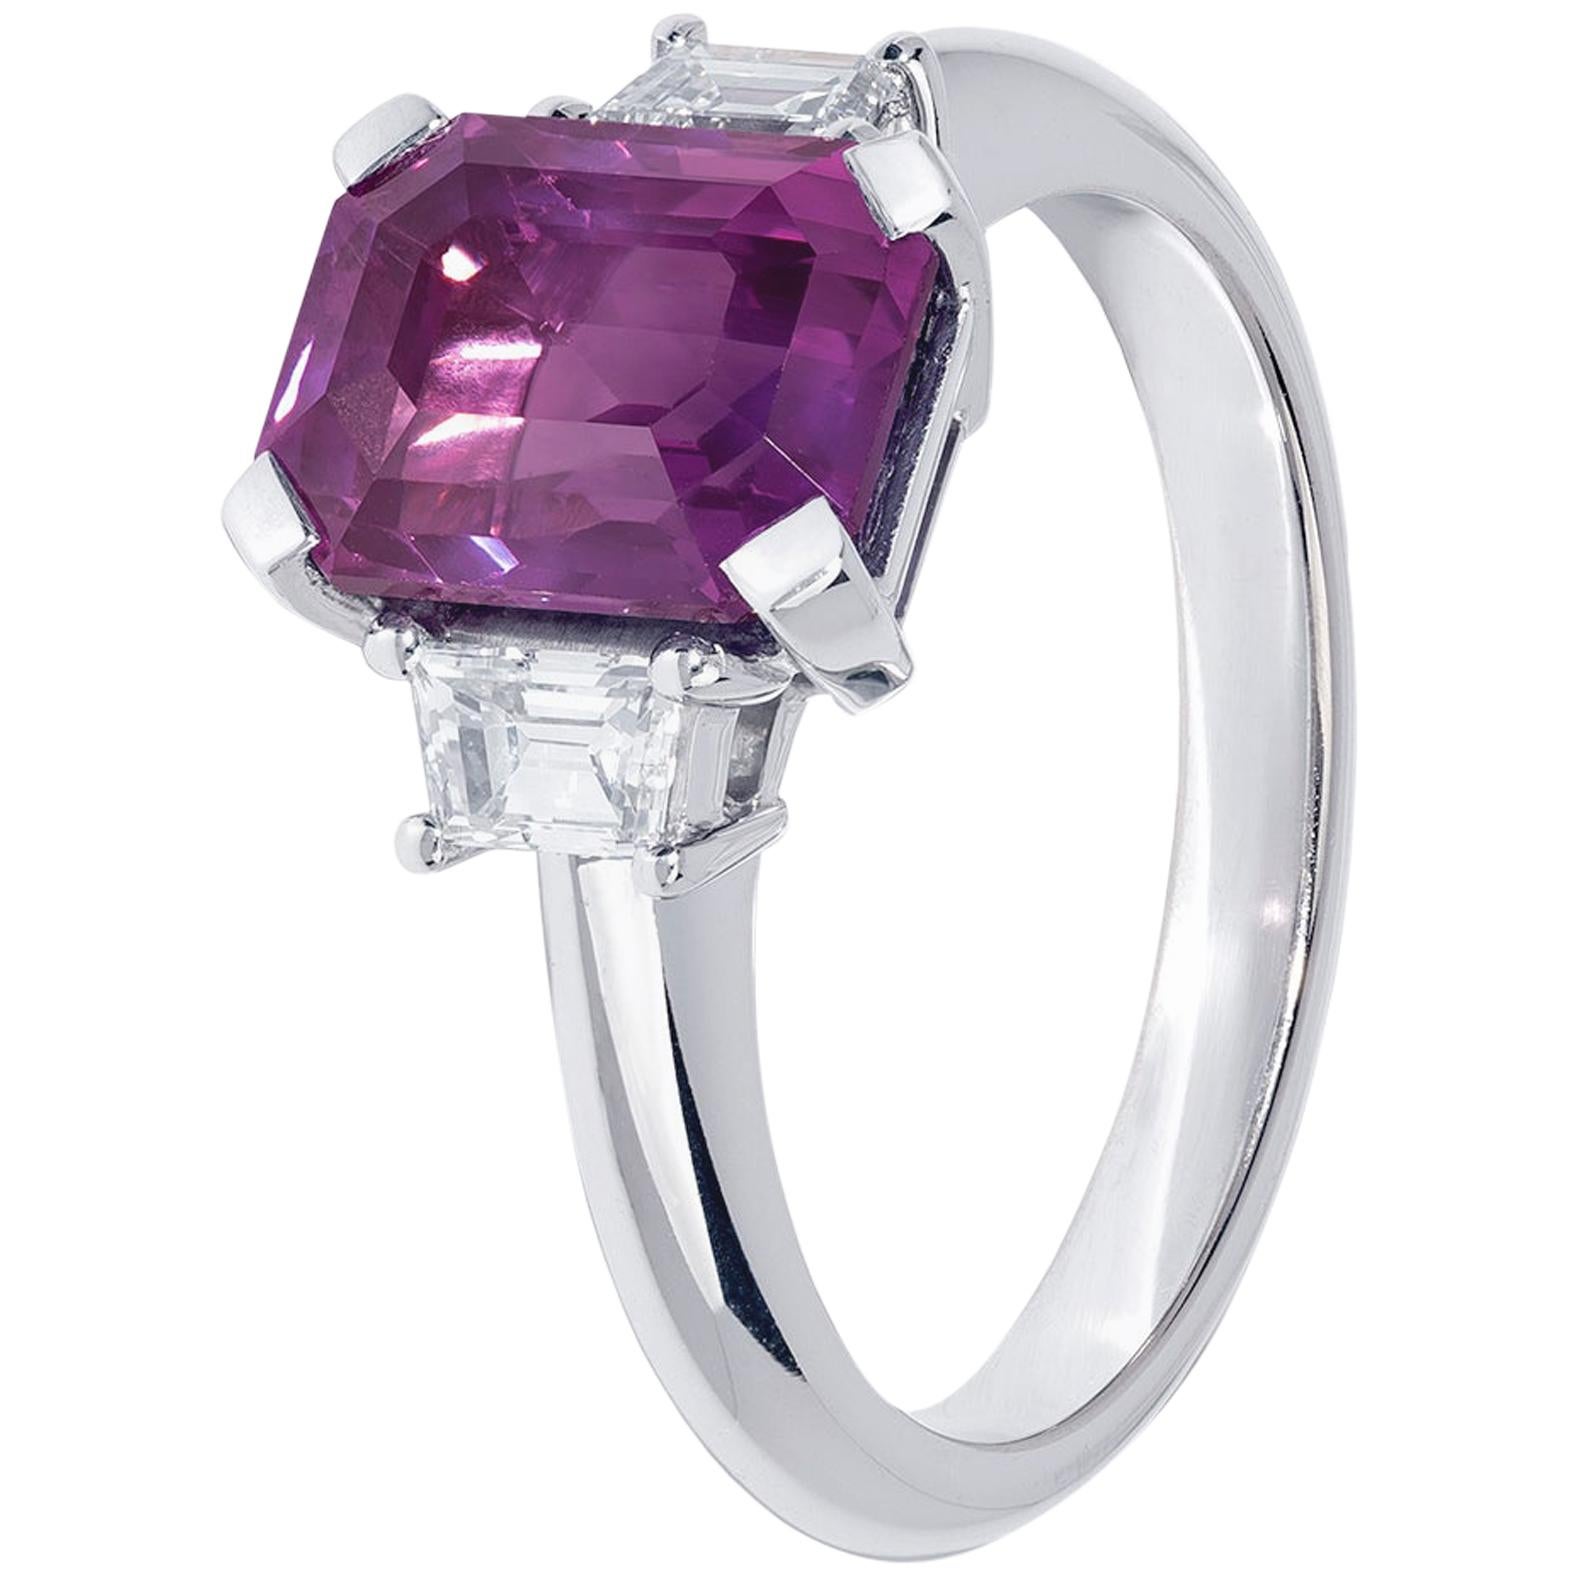 3.74 Carats Purple Sapphire Trilogy Ring with Diamonds in White Gold